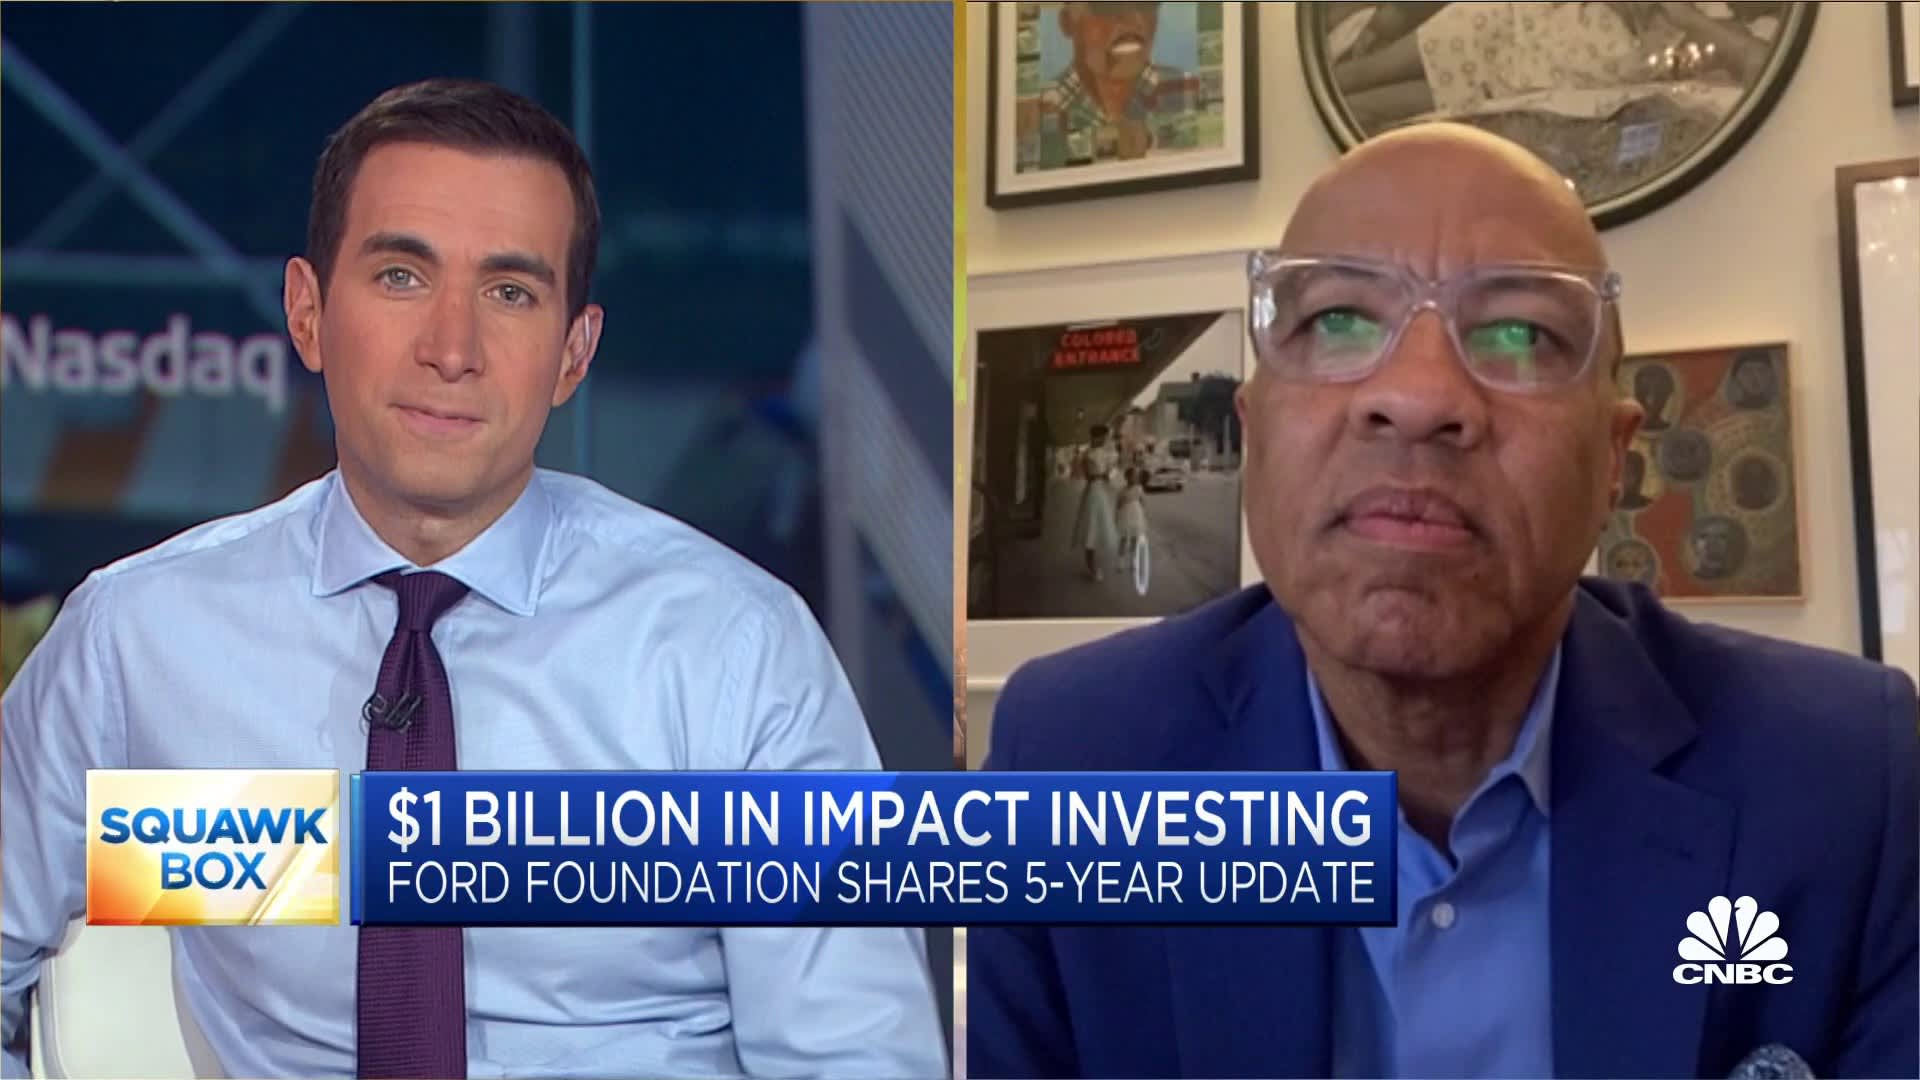 Ford Foundation president: It’s possible to make investments with social and financial returns